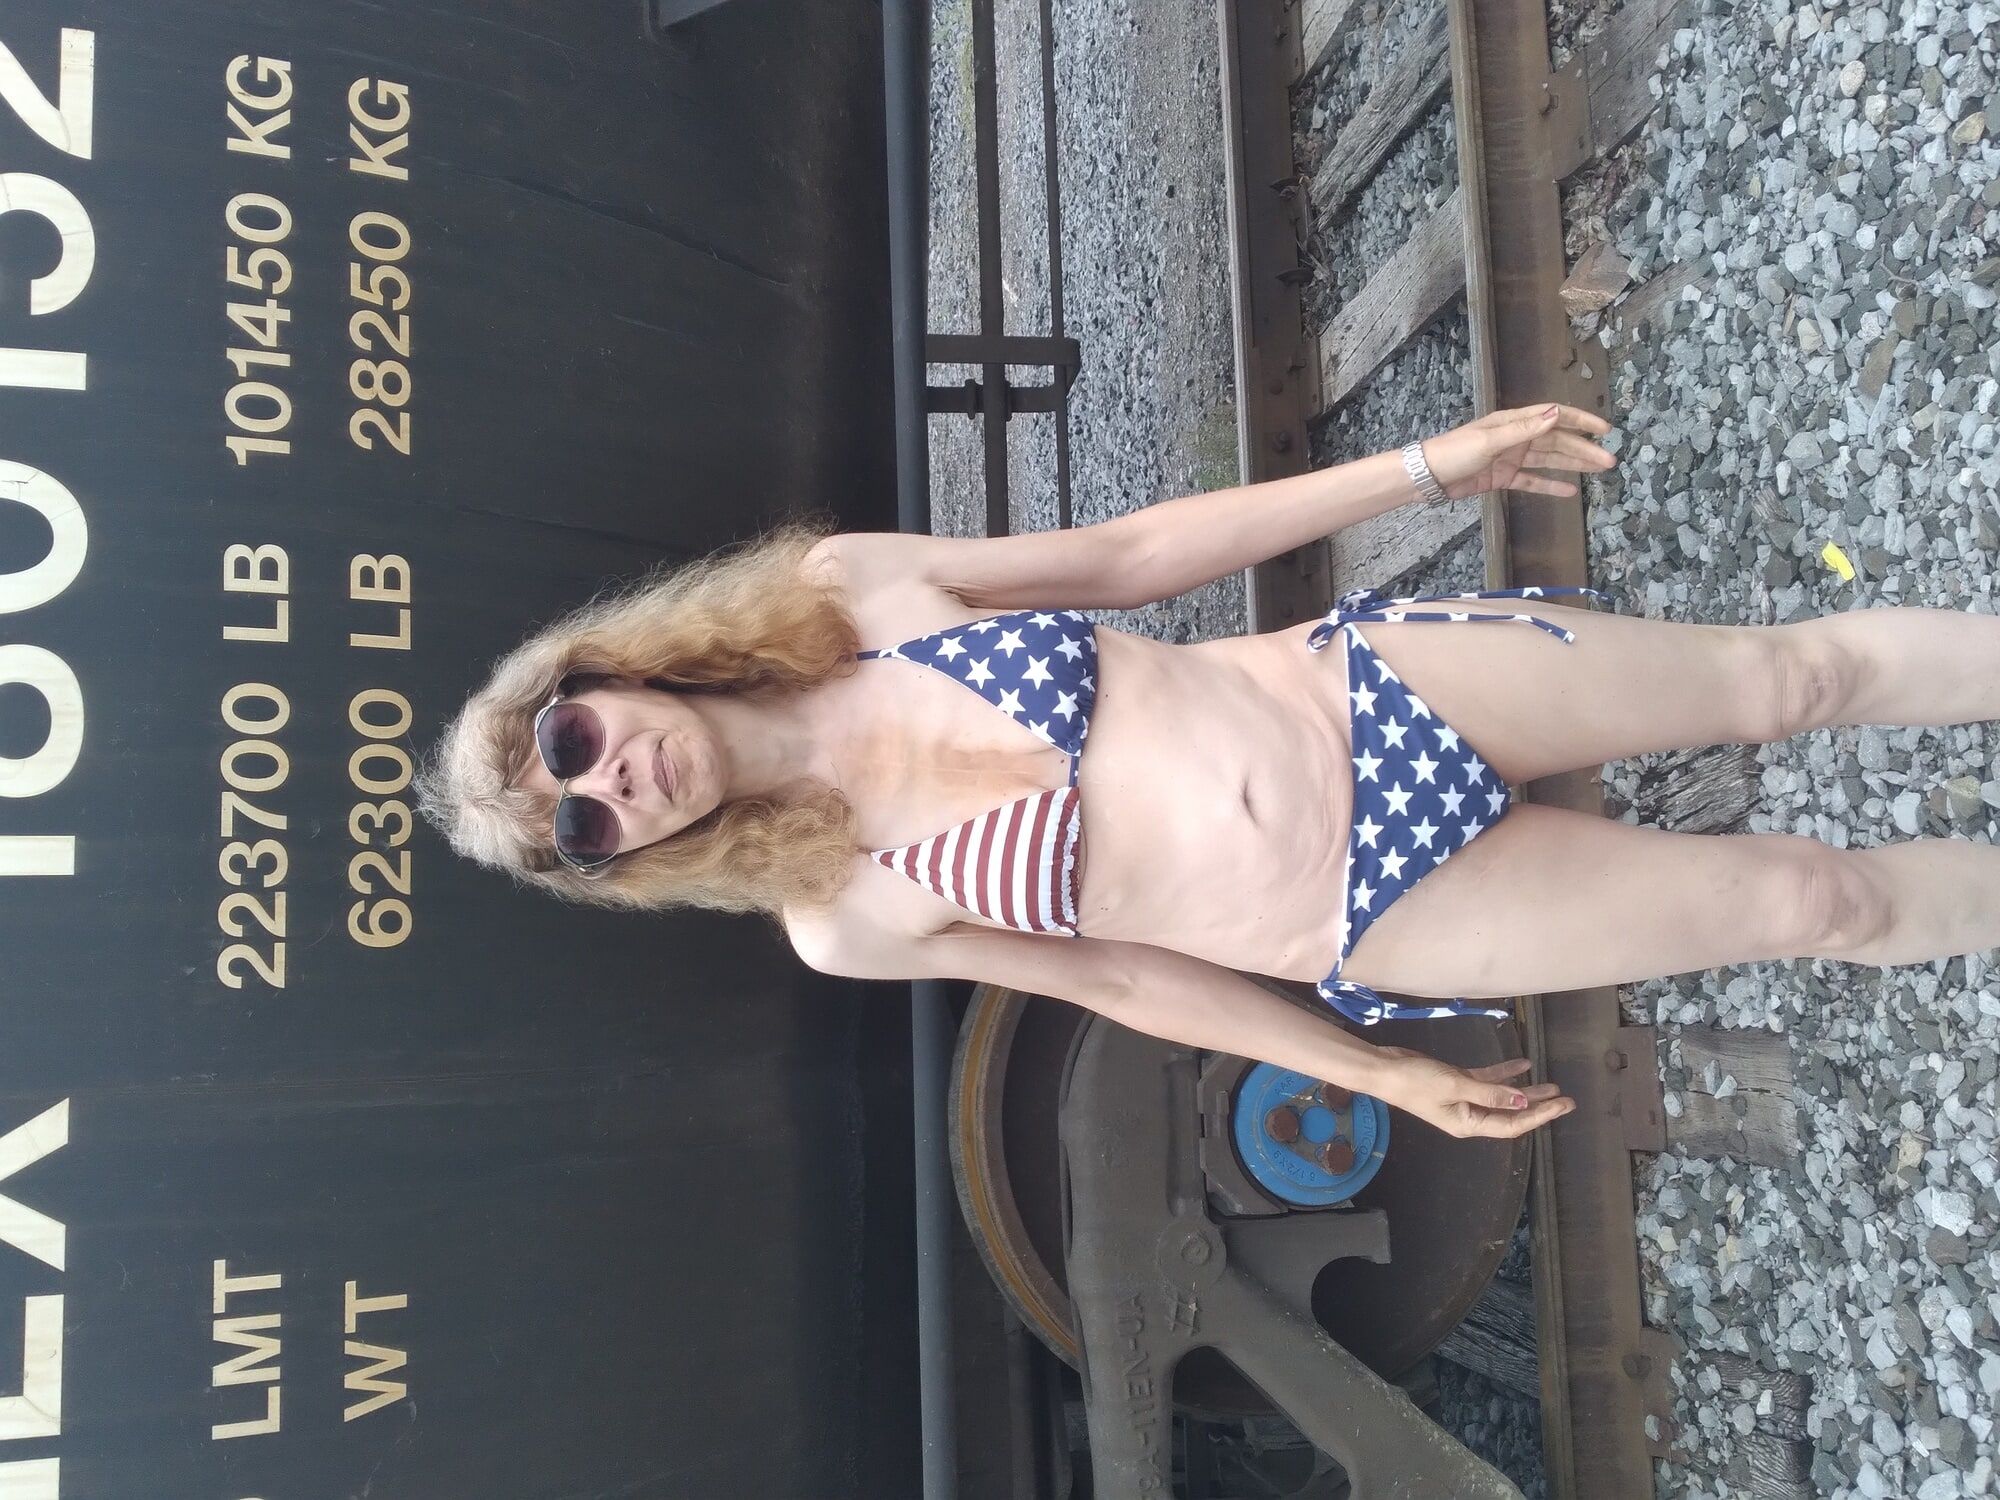 American Train. July 4th release. My best photo set to date. #12